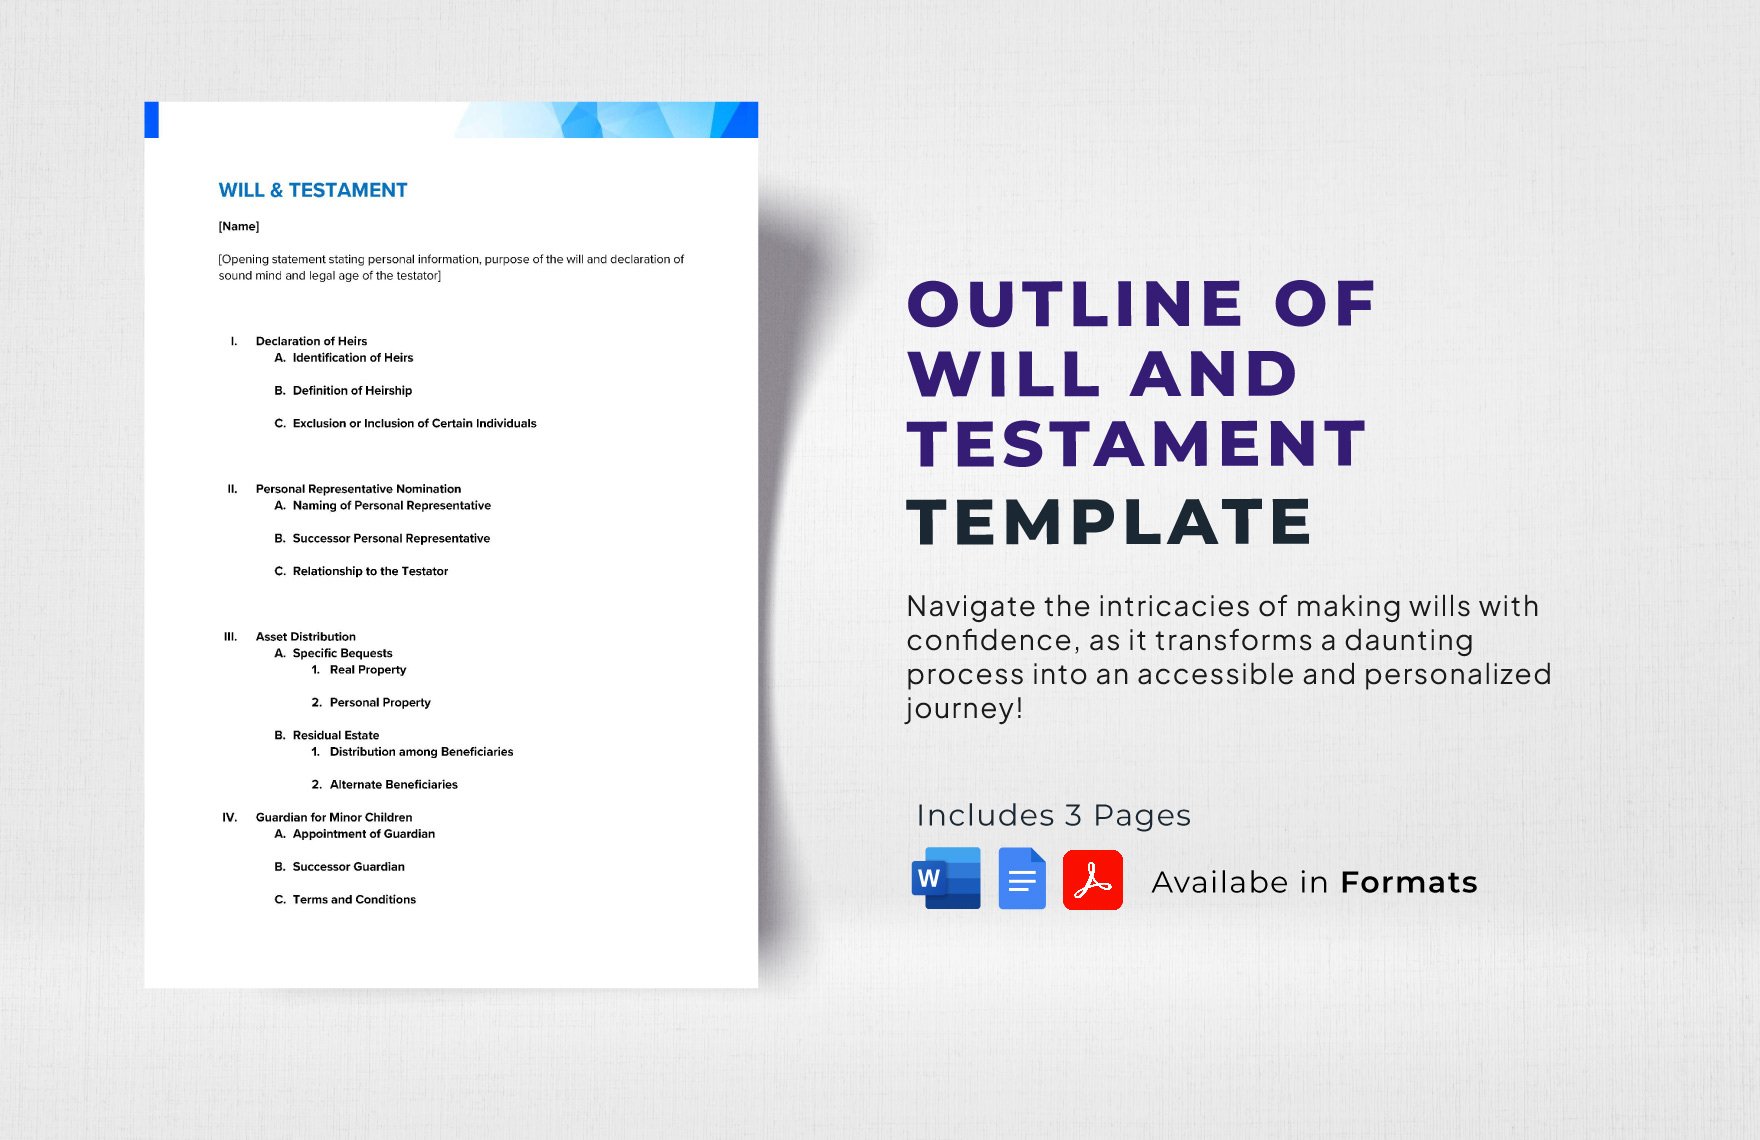 Outline of Will and Testament Template